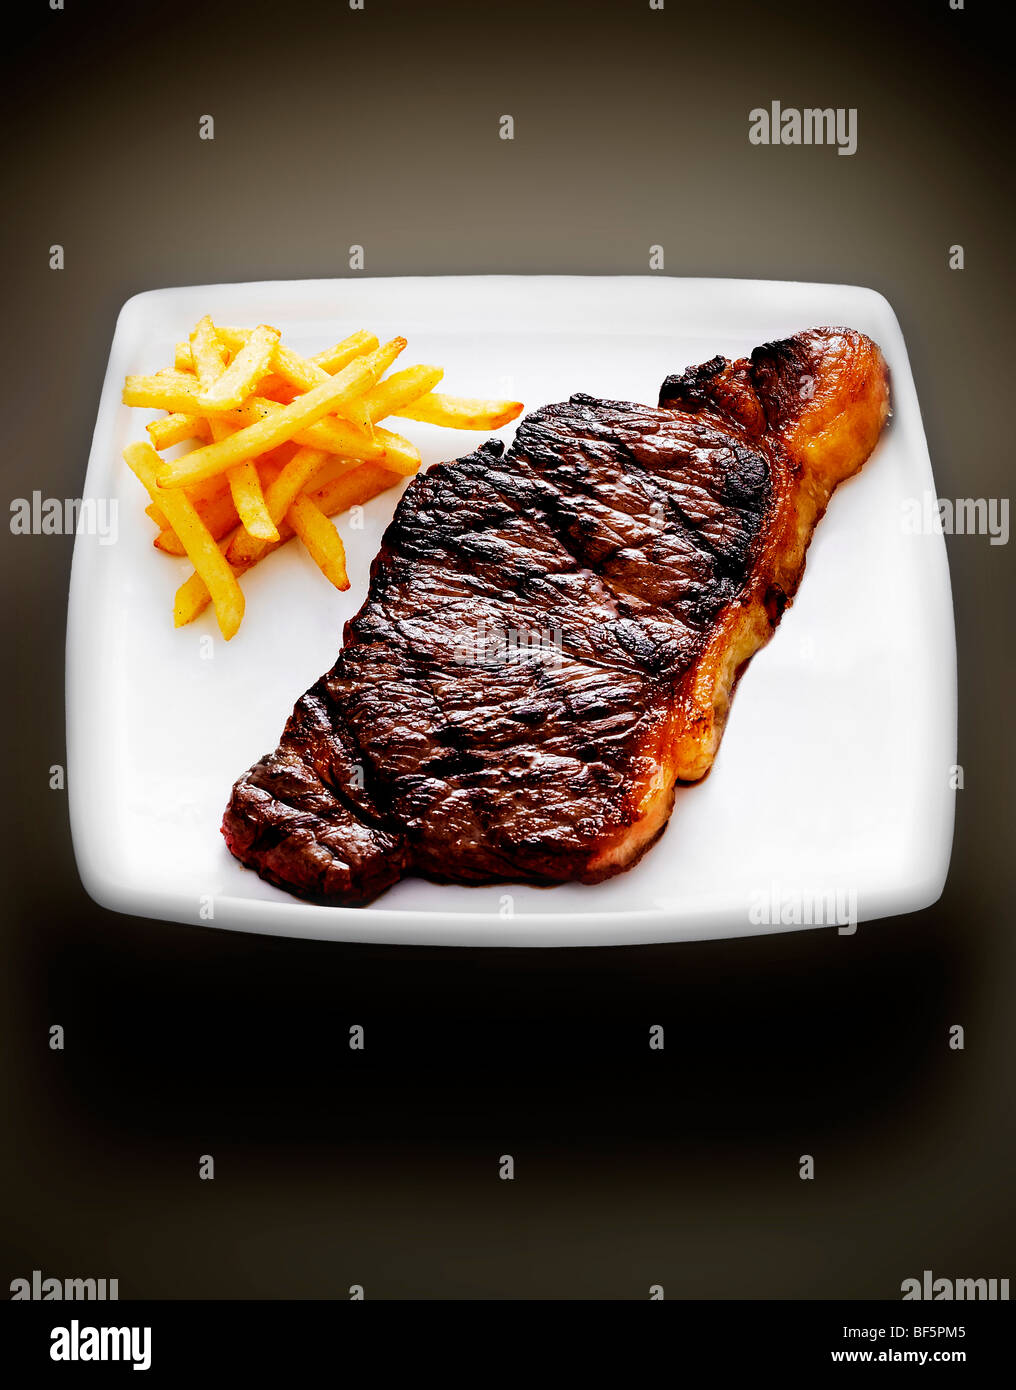 Steak and chips. Stock Photo